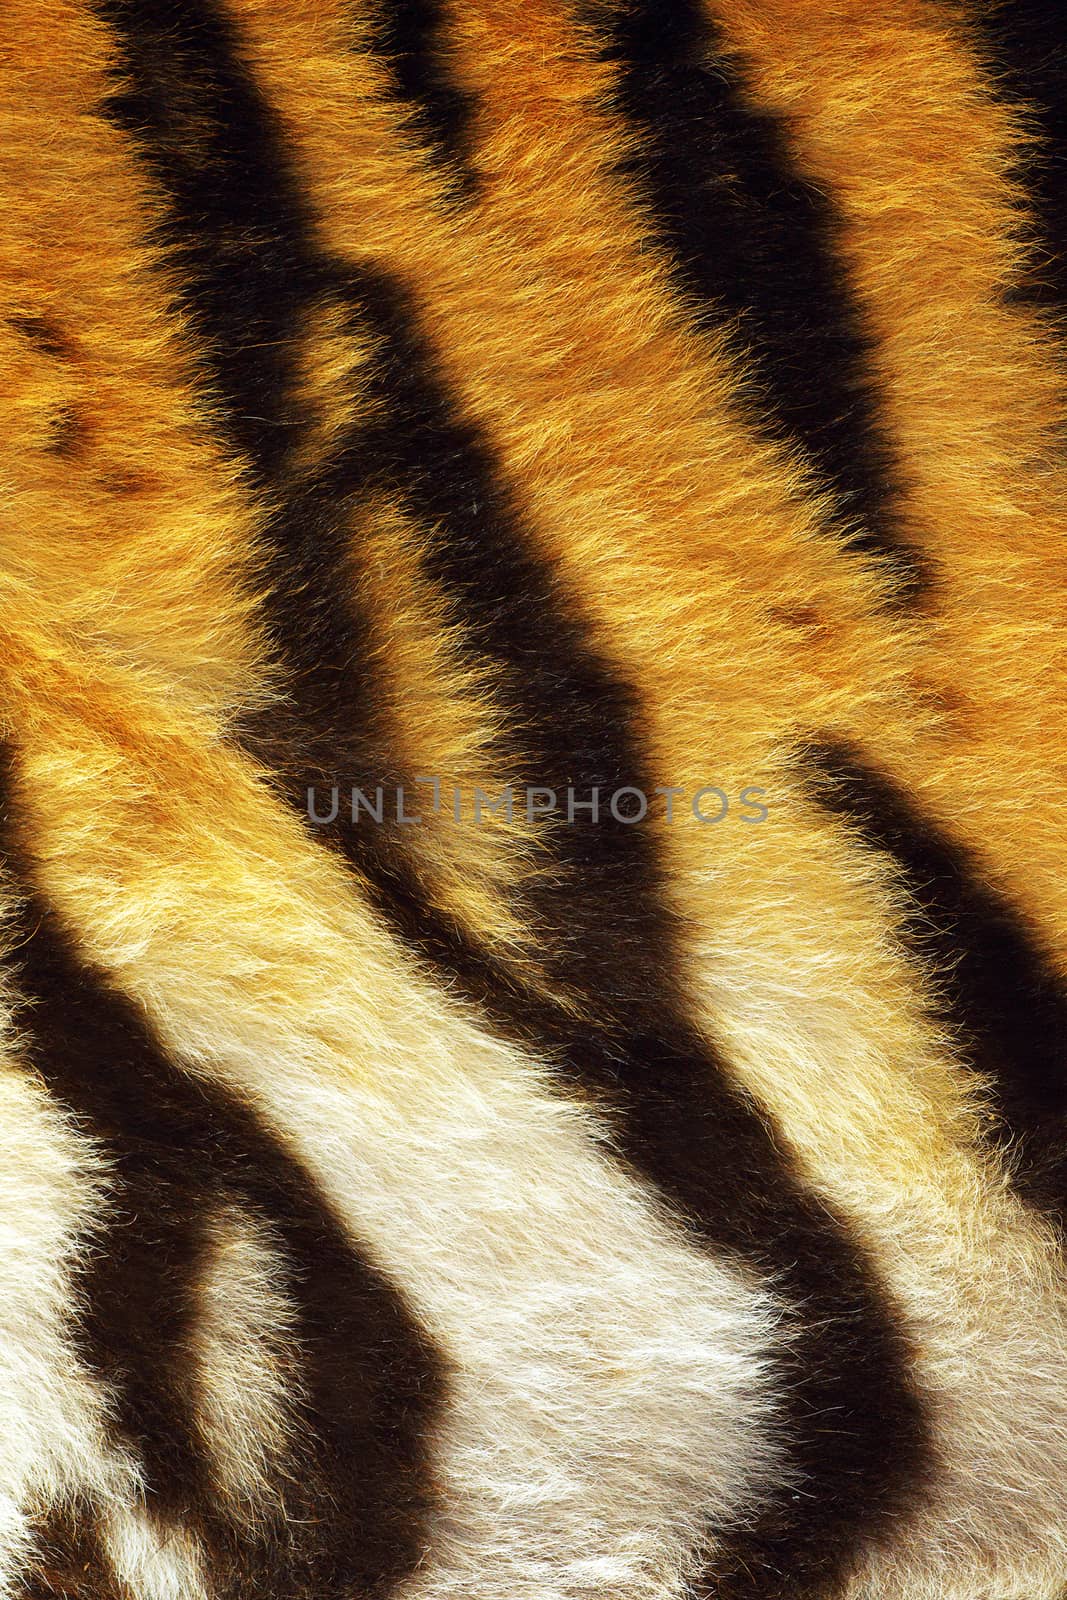 closeup of tiger stripes on fur by taviphoto